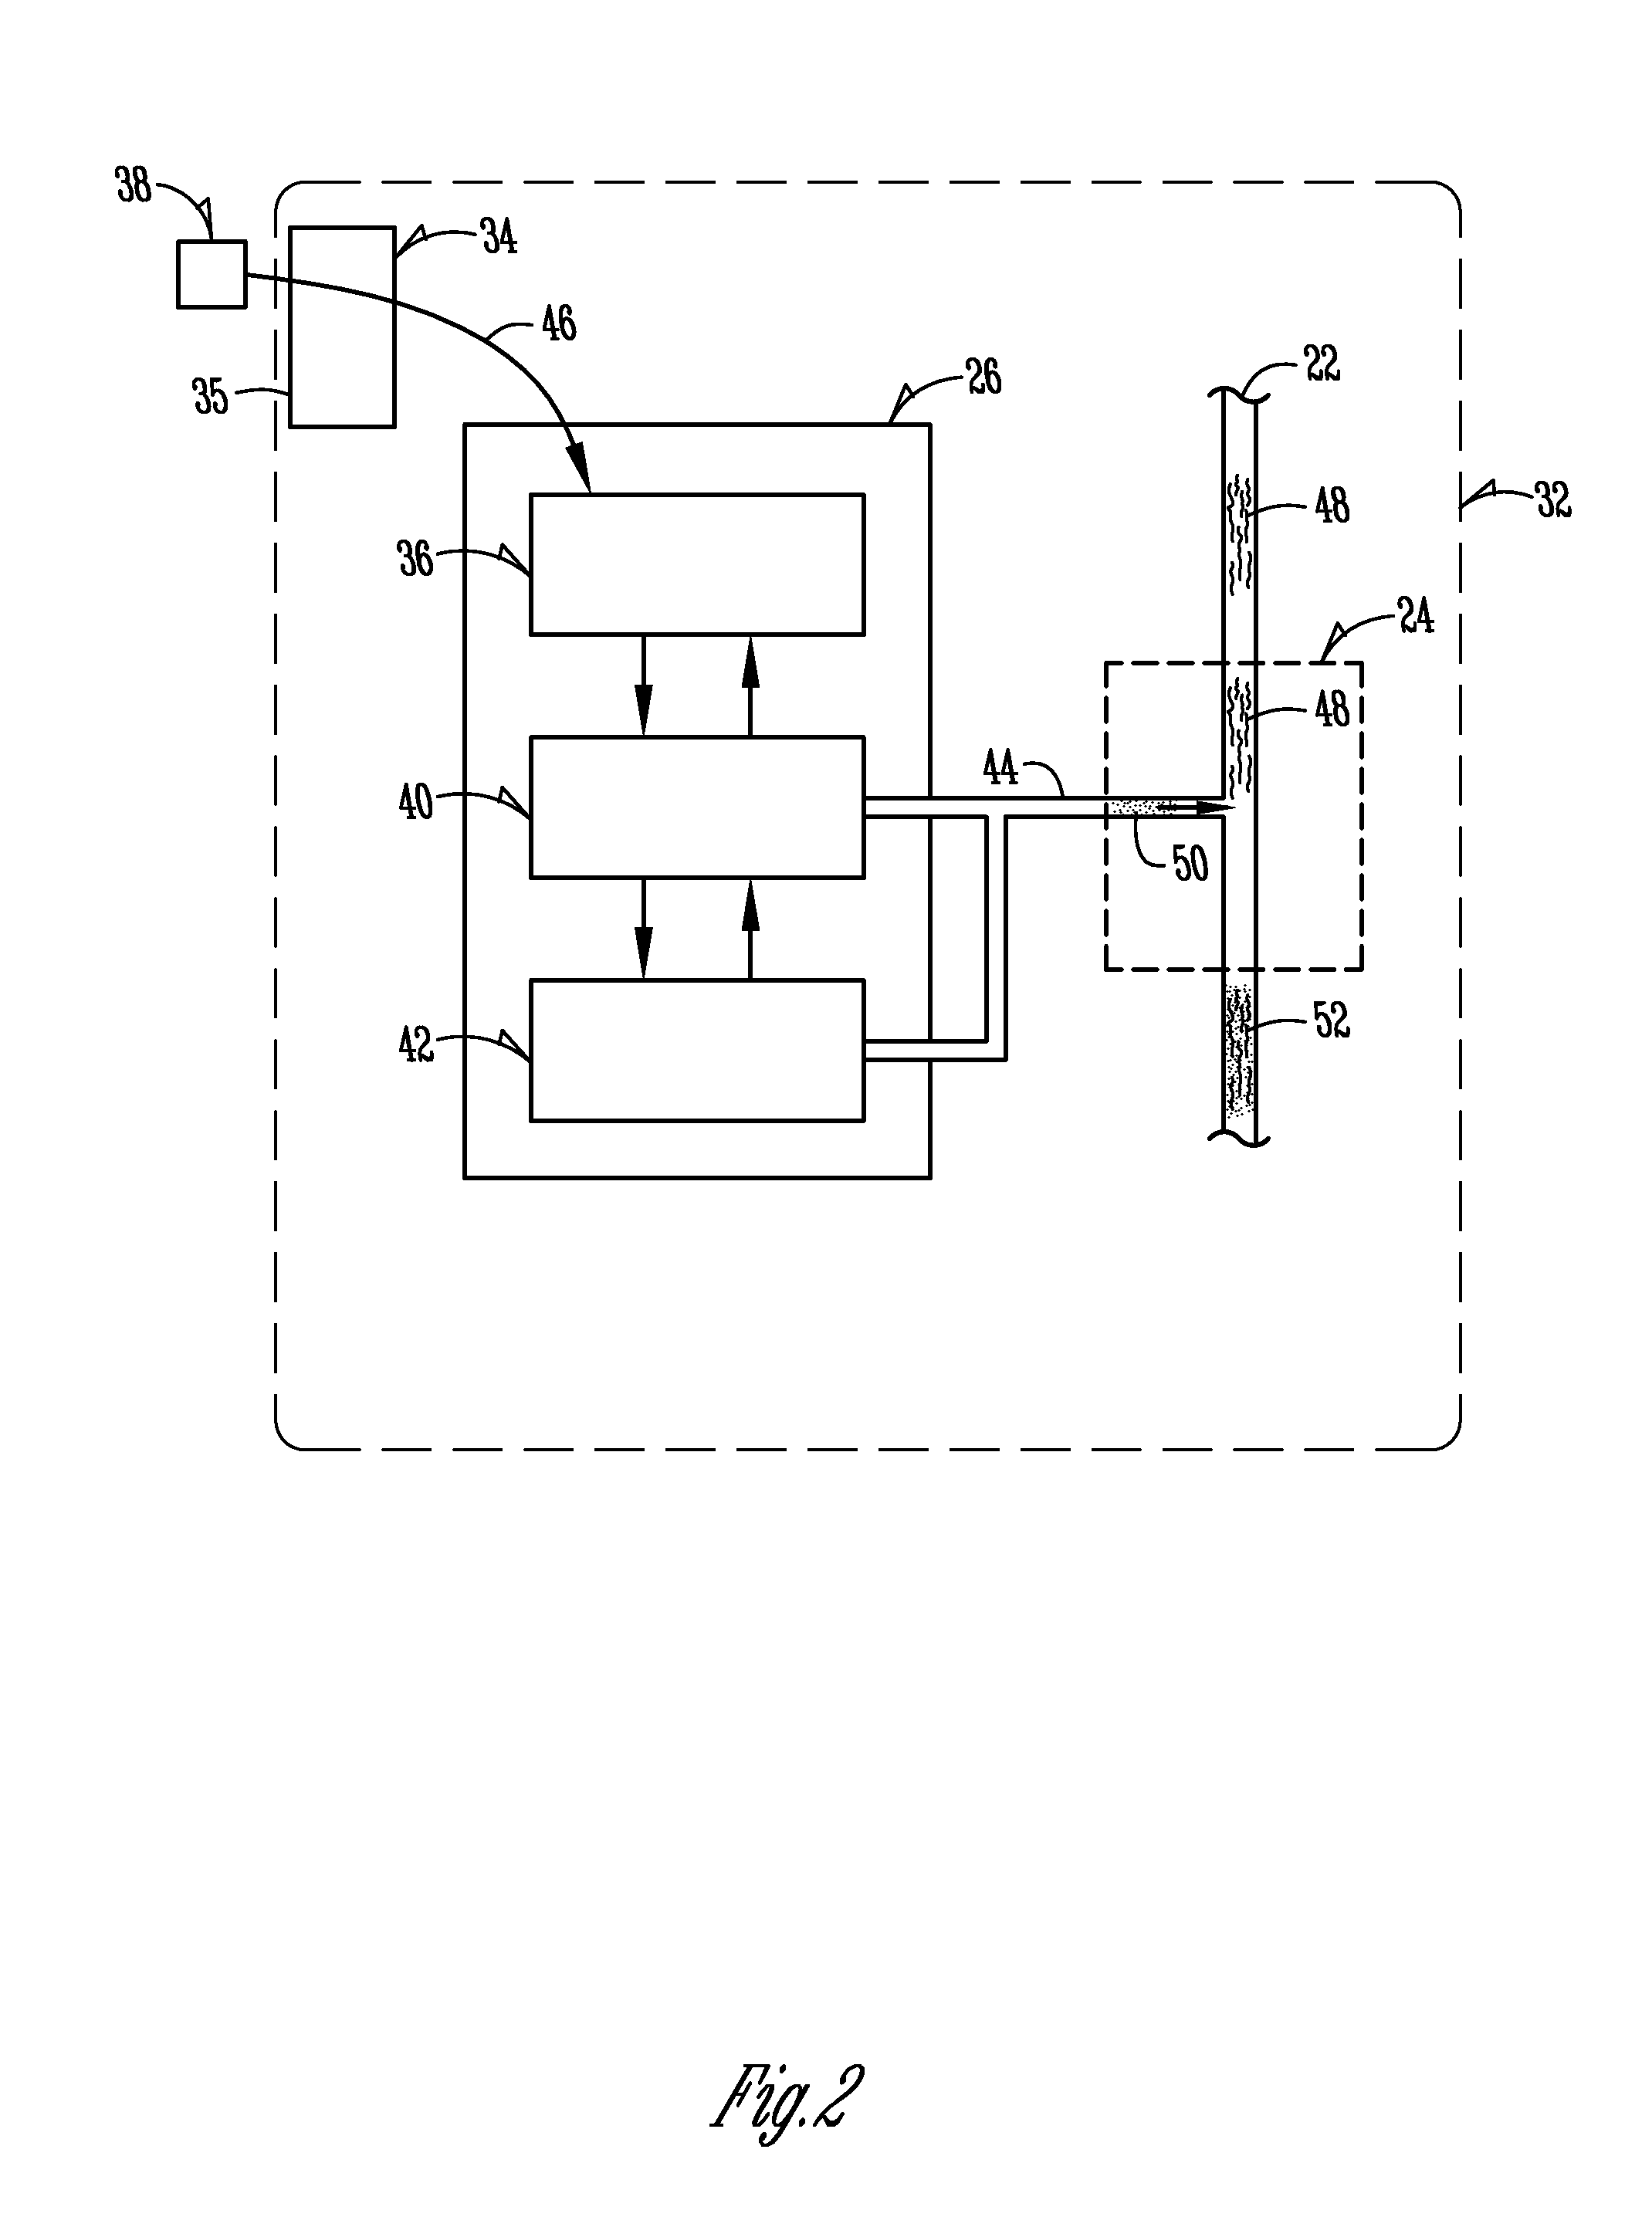 Apparatus, method and system for managing and dispensing liquid enhancement components from a refrigerator